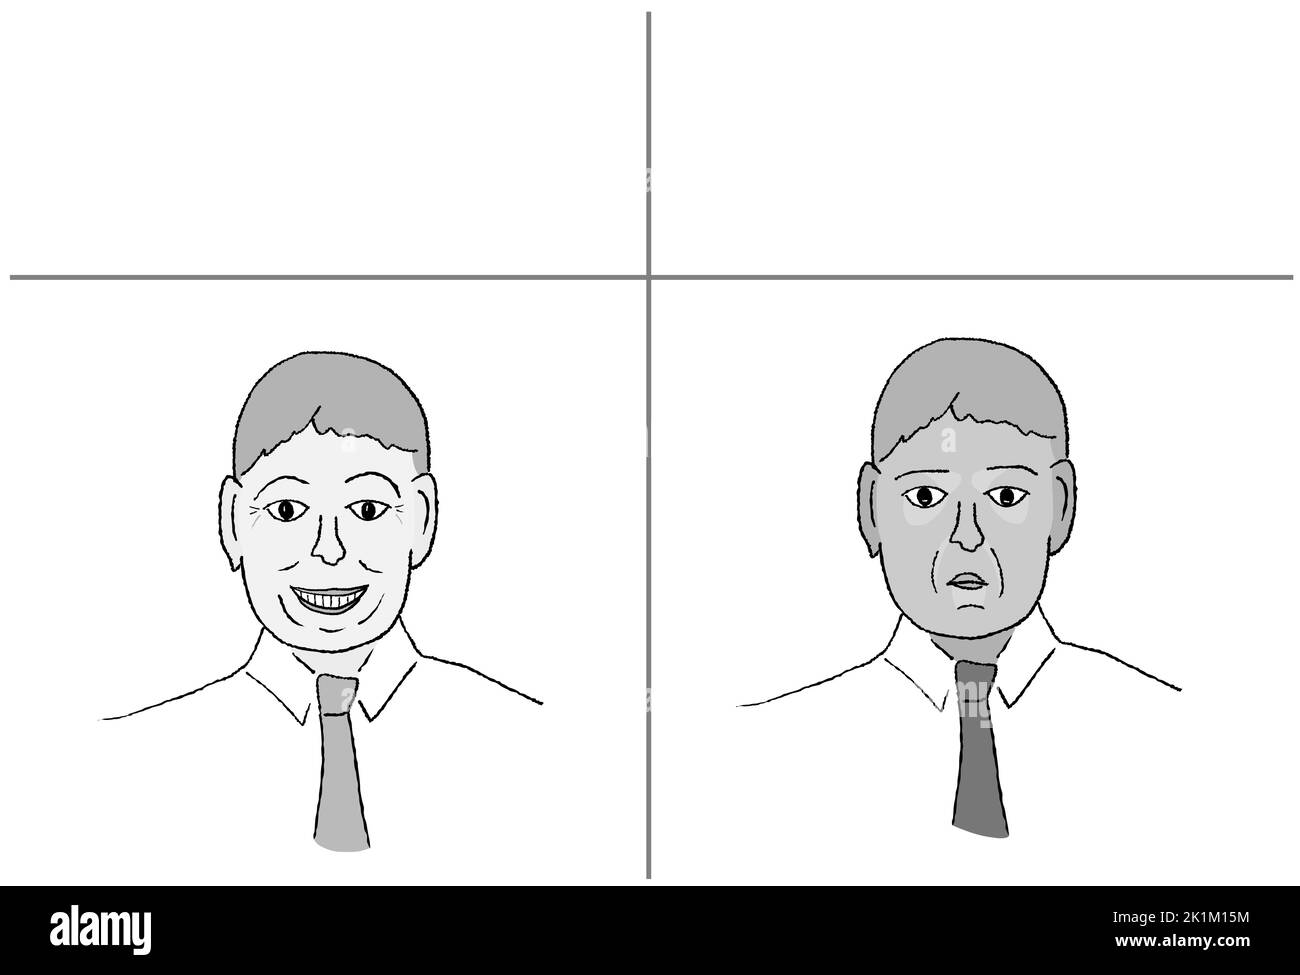 Meme template for social media sharing. Smiling office man and displeased serious face reaction. Stock Vector